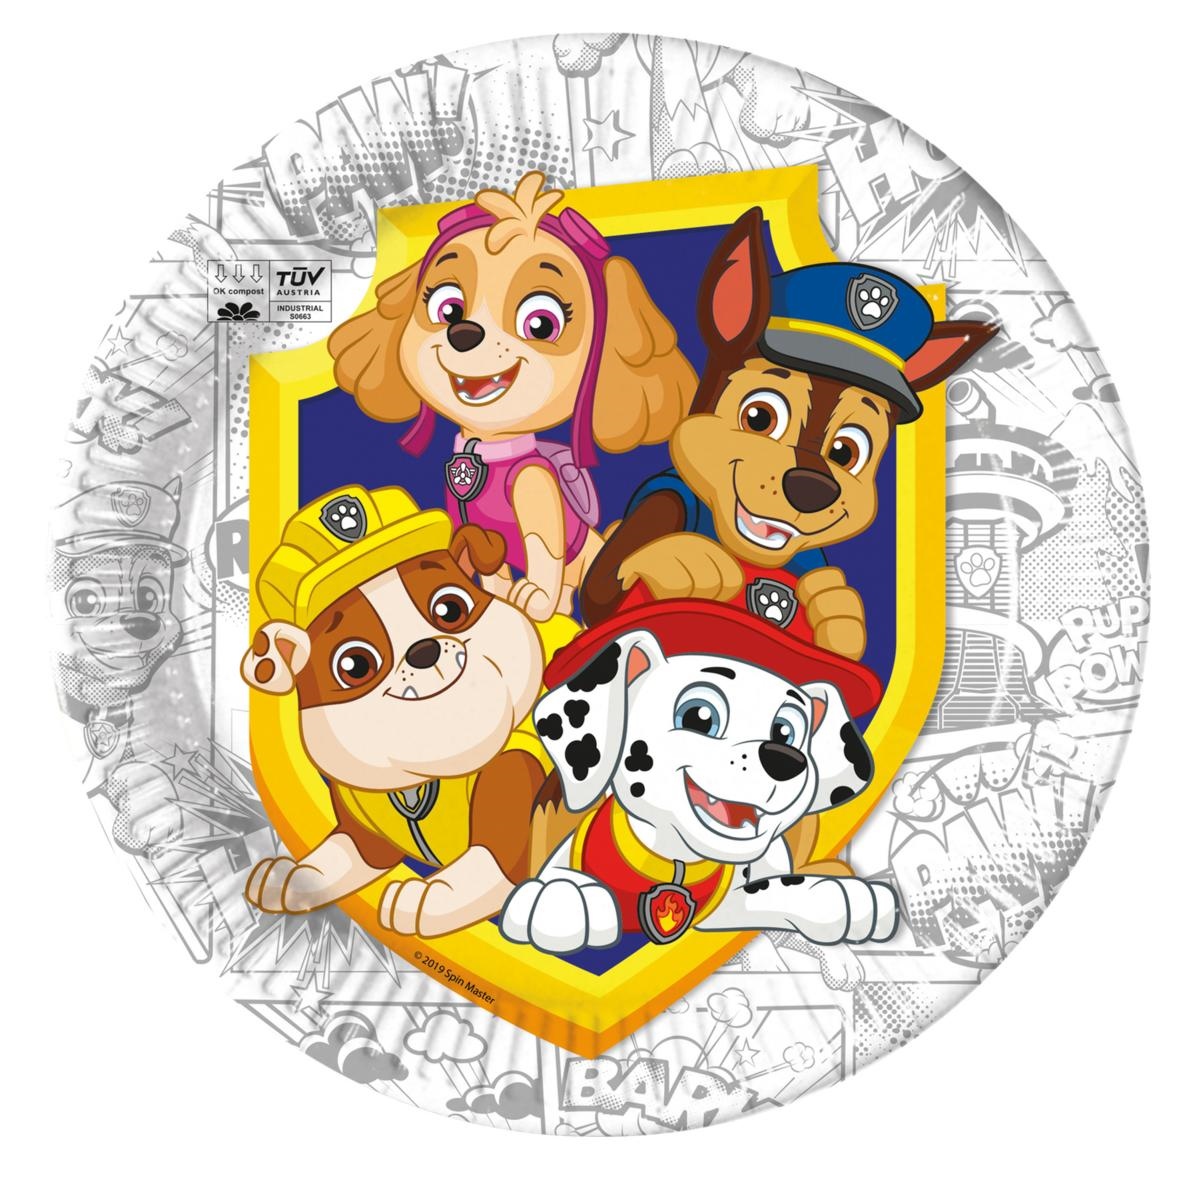  8 Paper Plate Paw Patrol yelp for action composta